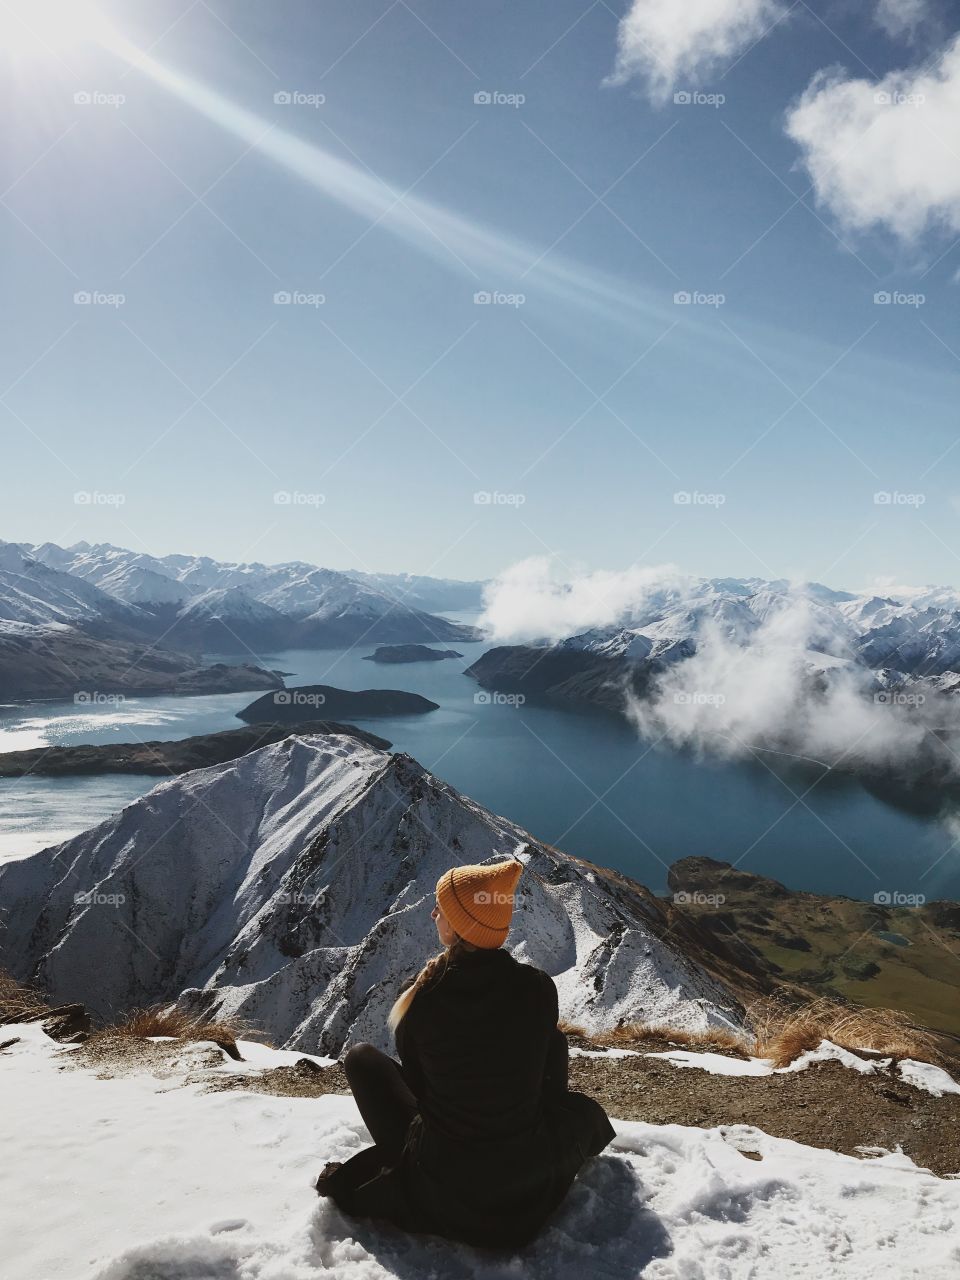 Mountain top vibes after a 3 hour long hike. A great view over lake Wanaka in New Zealand. 🏔